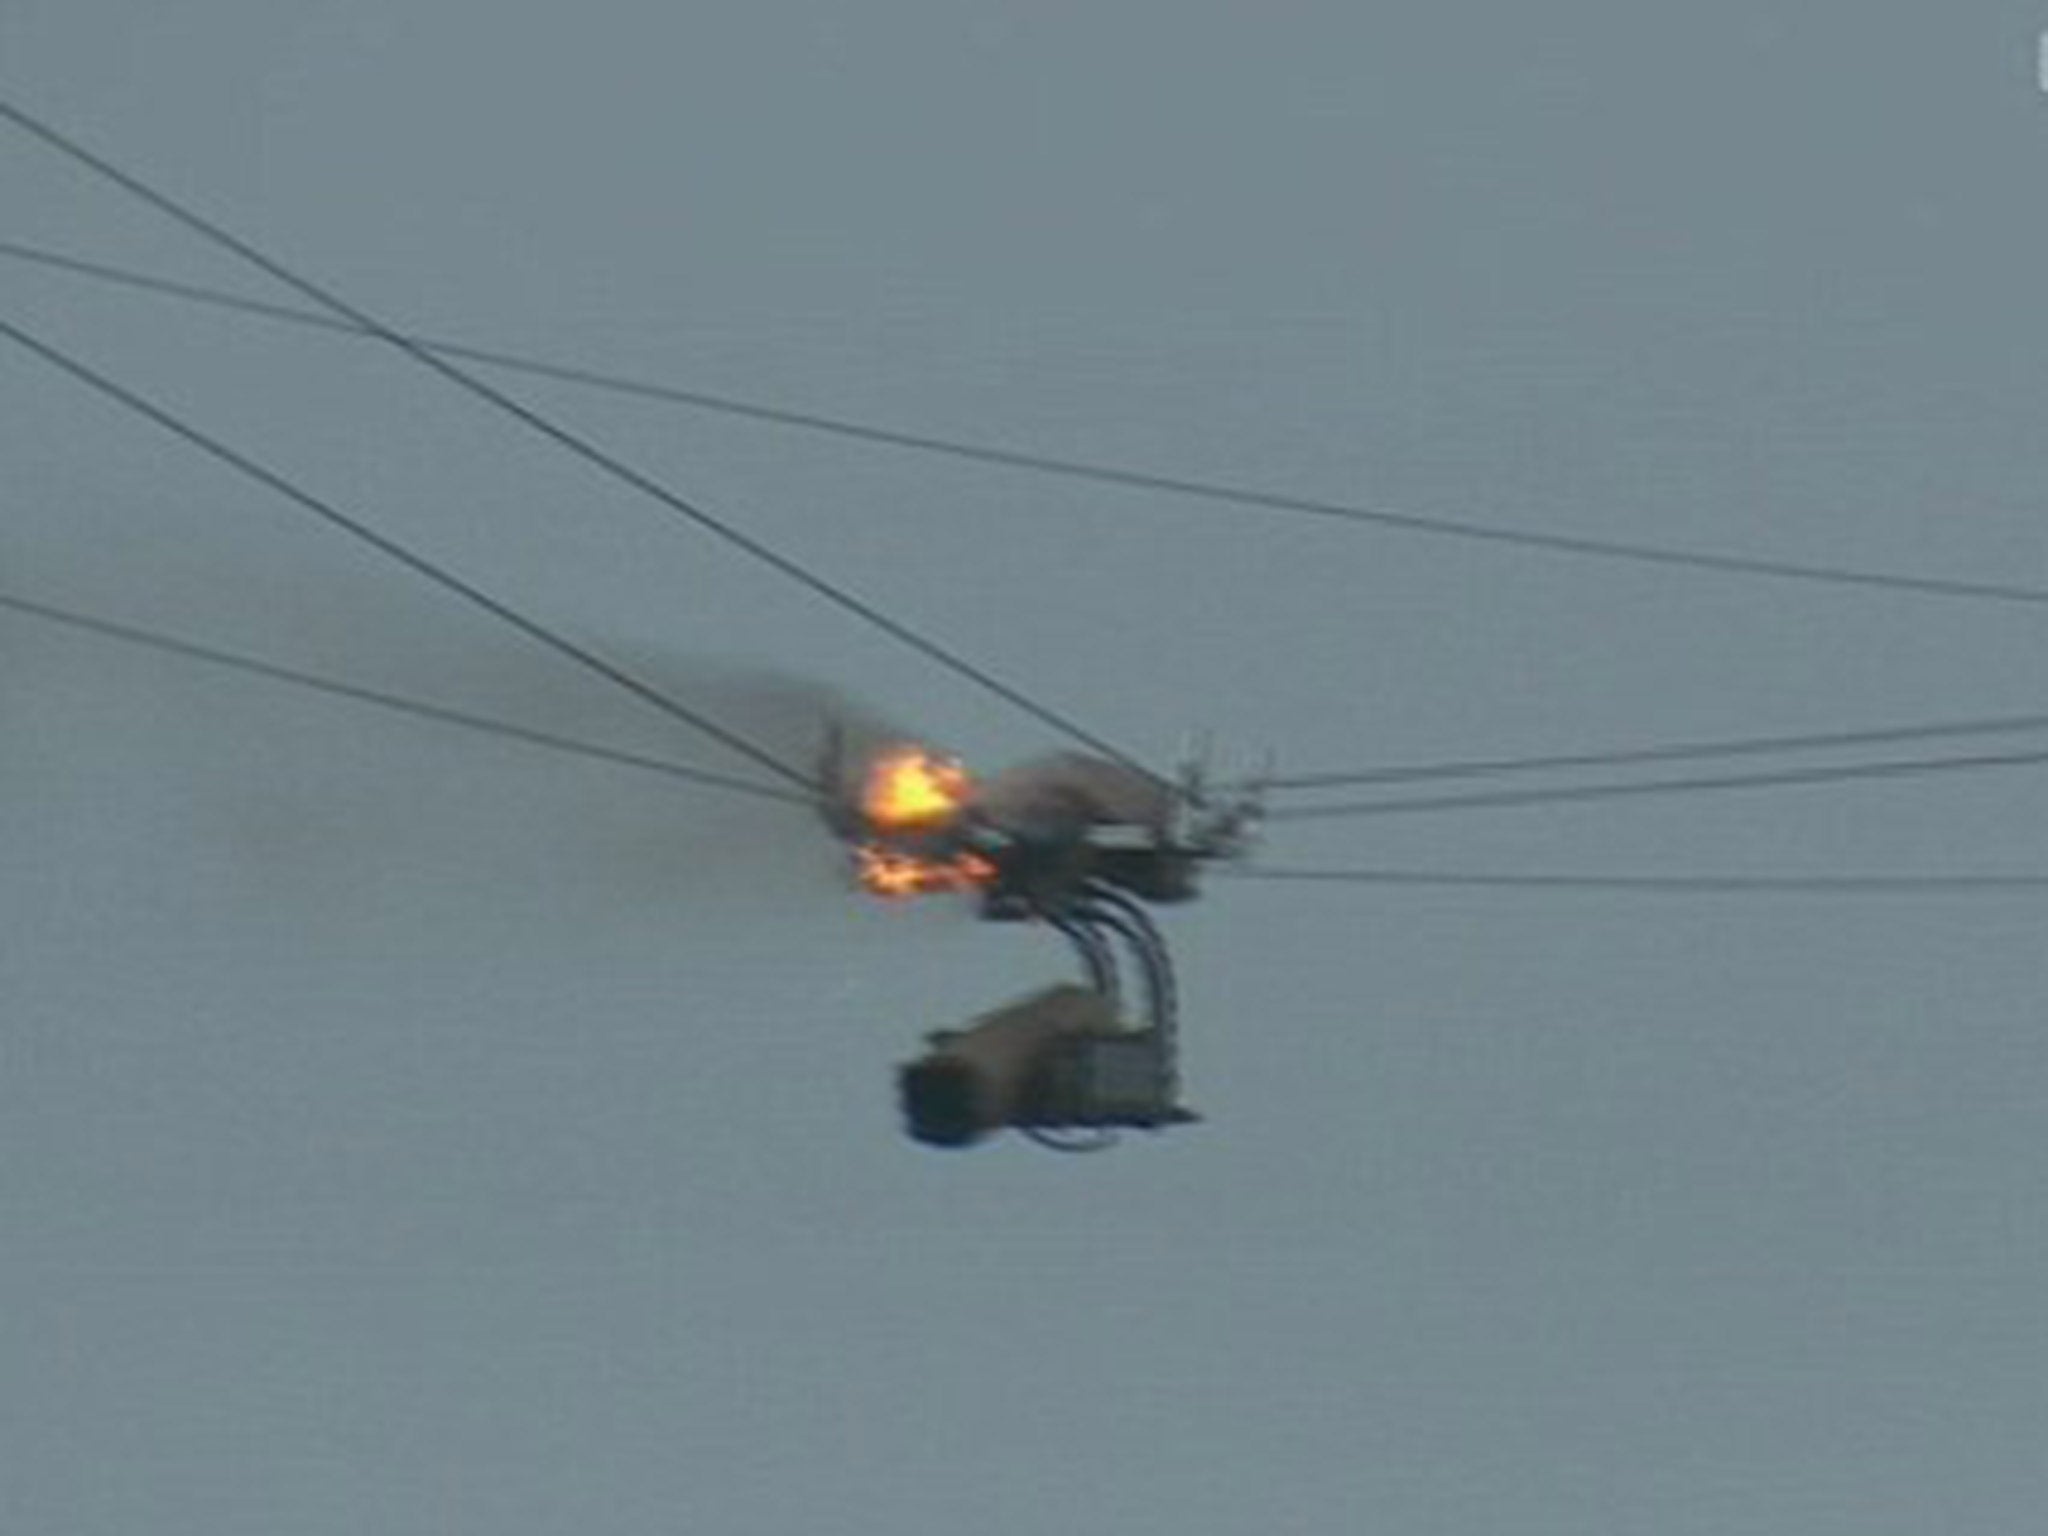 The Sky Sports cable camera catches fire above the Royal Troon Golf Course during The Open